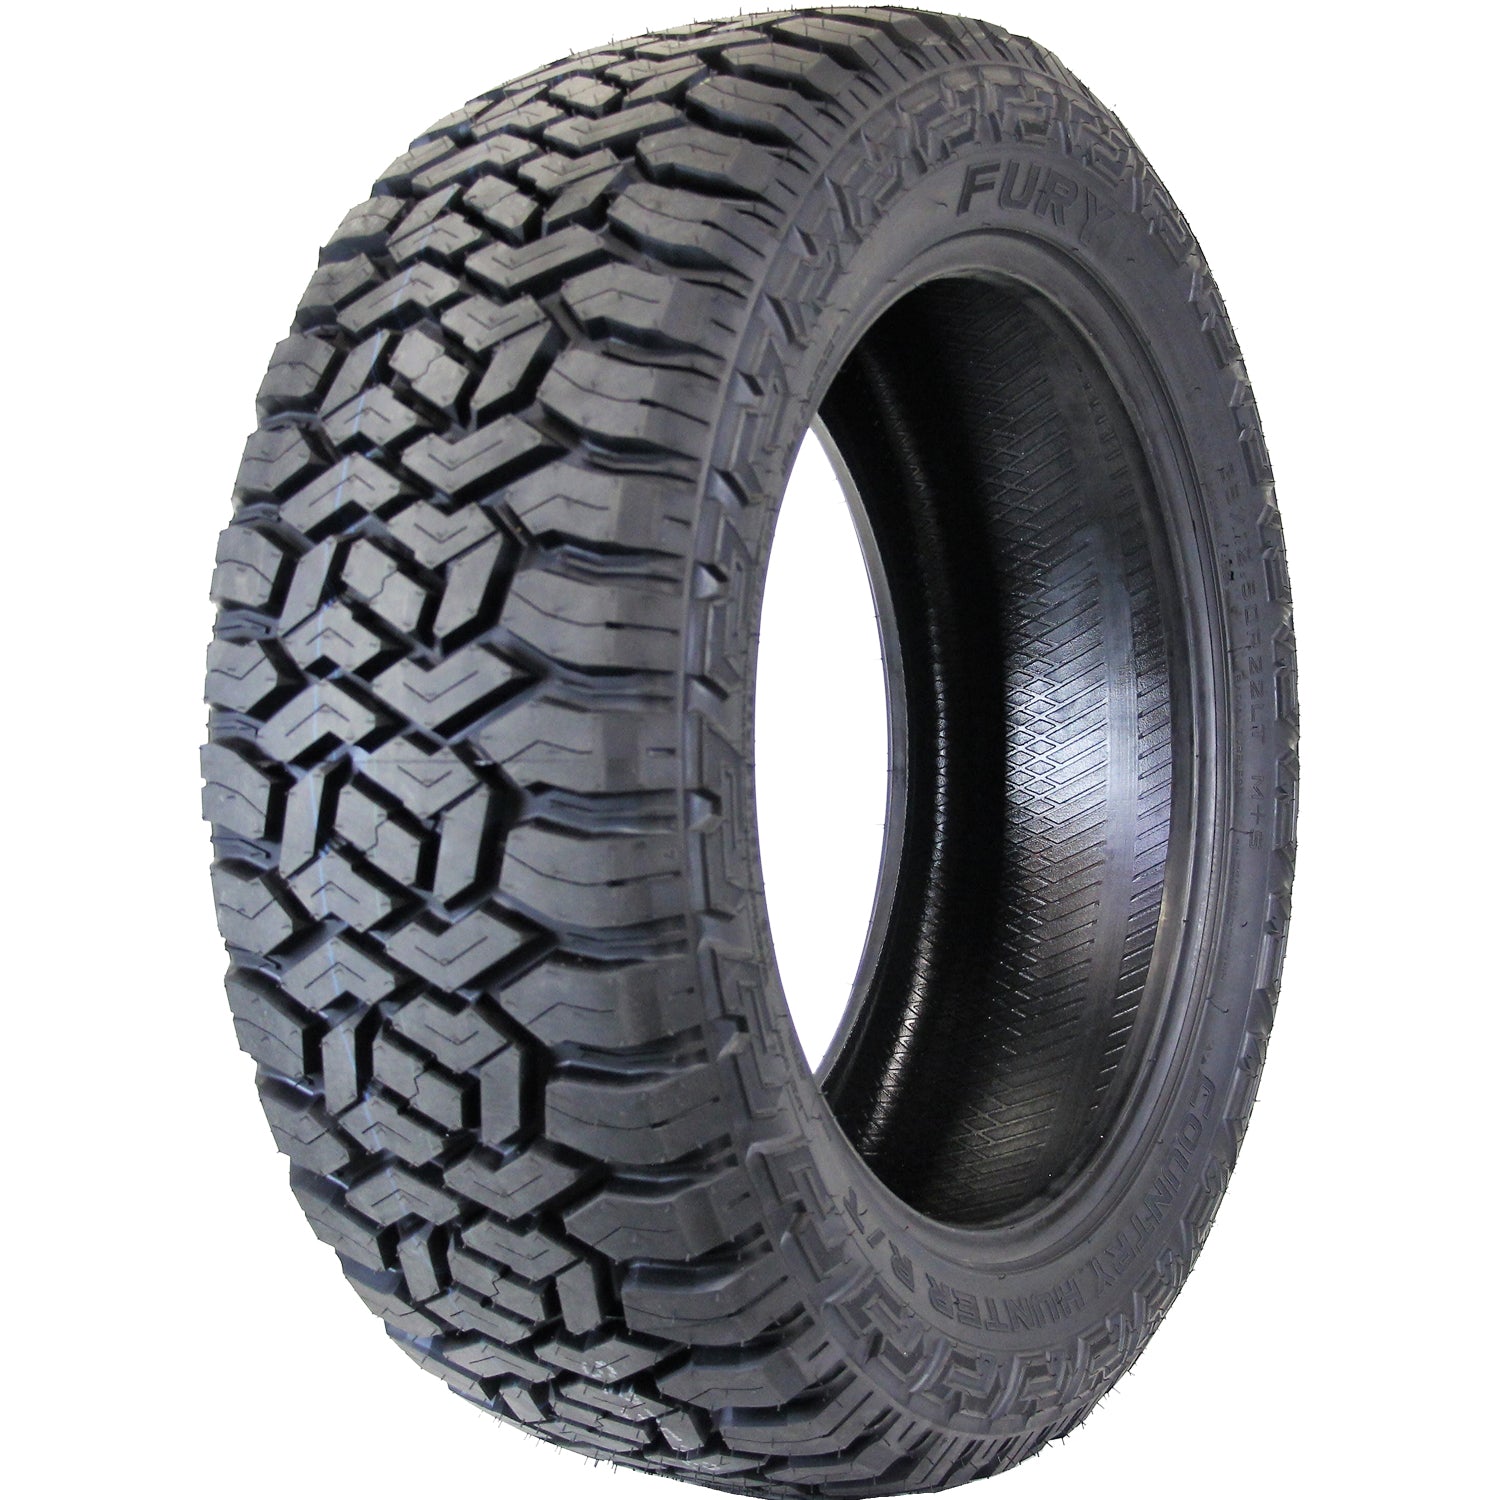 FURY OFFROAD COUNTRY HUNTER RT LT265/70R17 (31.7X10.7R 17) Tires